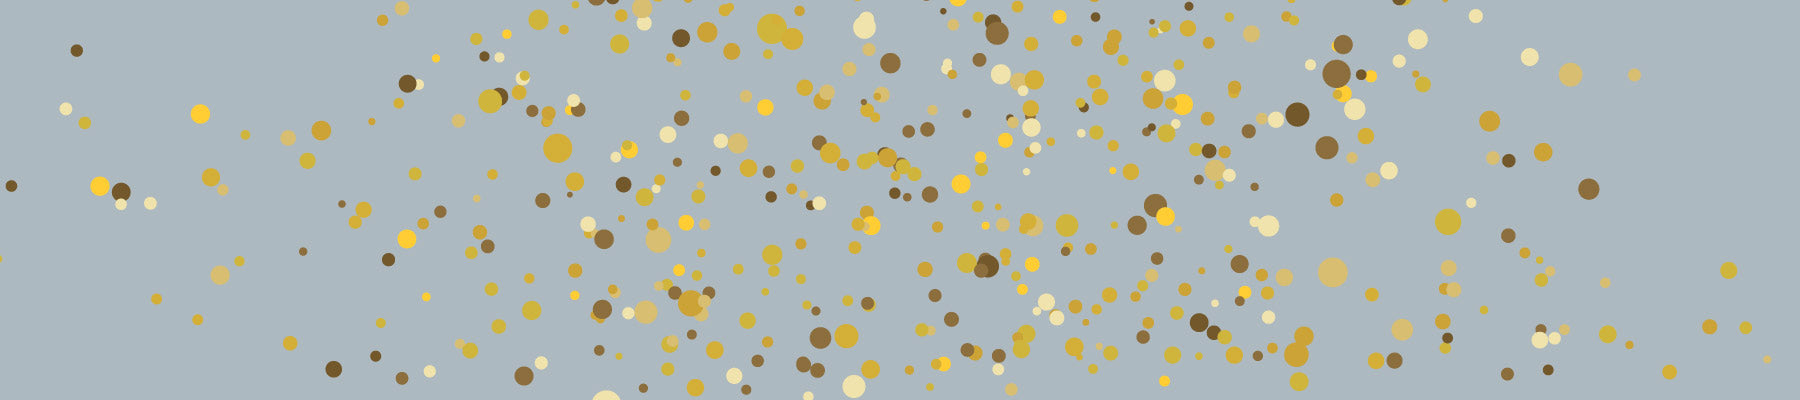 light blue/grey background with gold sparkles